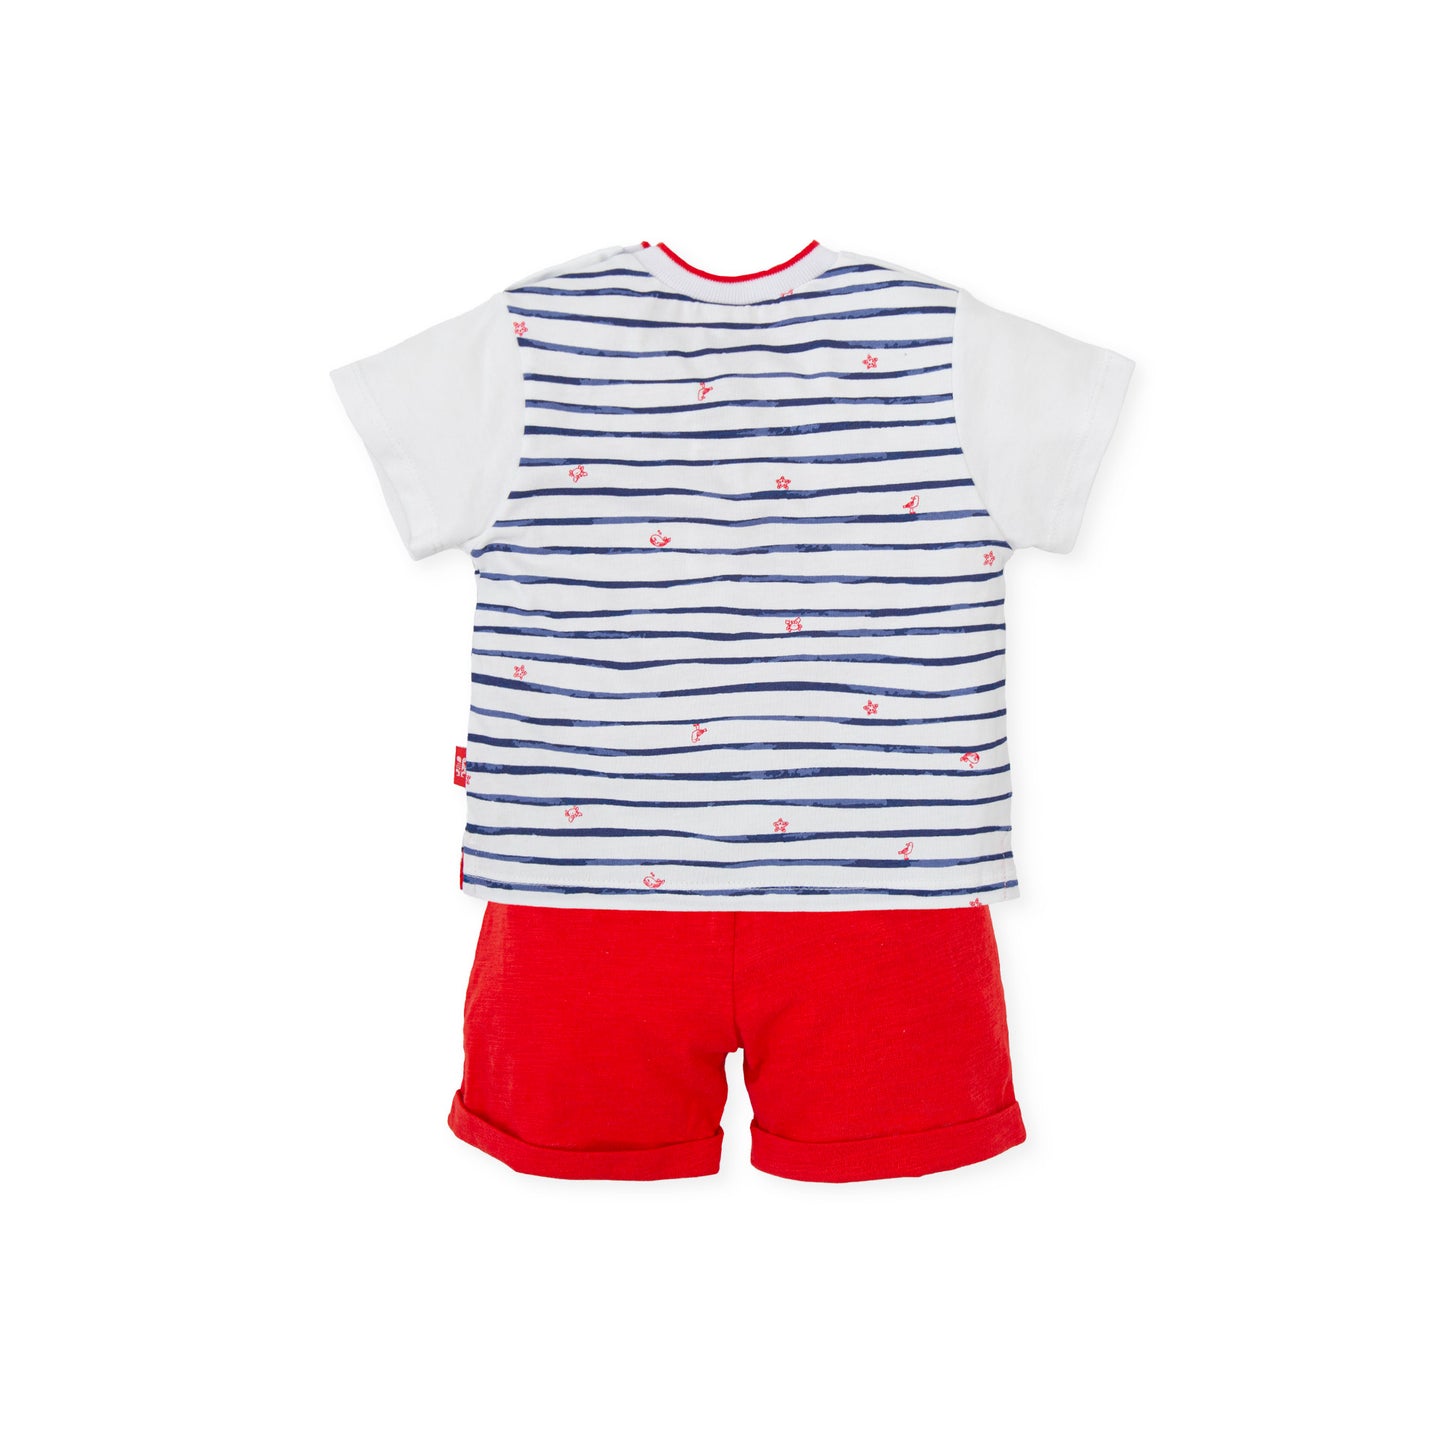 TUTTO PICCOLO Buceo Navy & Red Boys Short Set - 7587